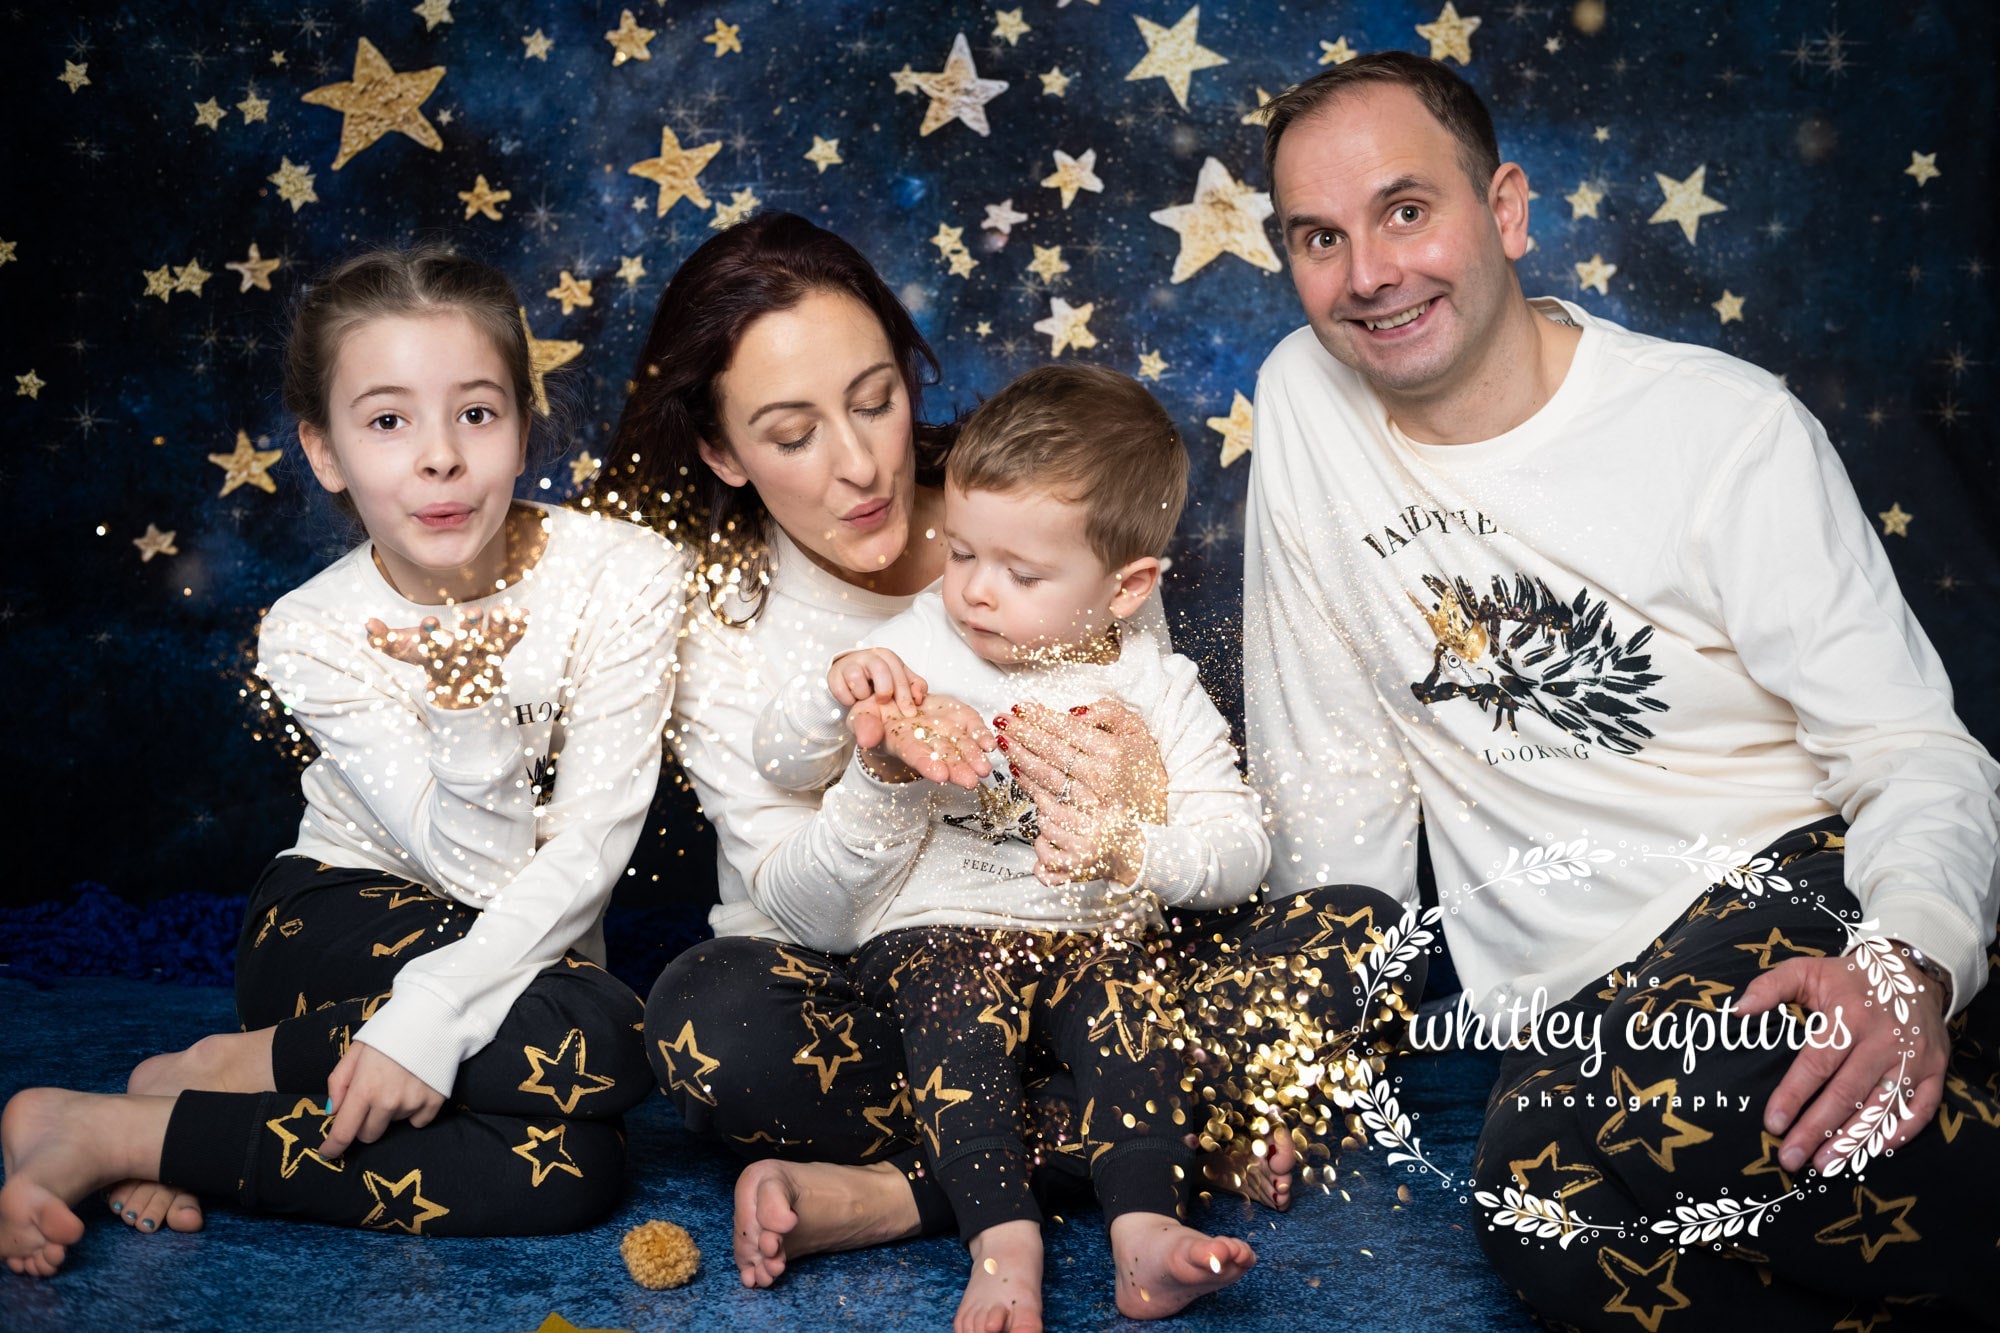 Kate Night Sky with Gold Stars for Children Photography Designed by Mandy Ringe Fabric Backdrops Christine10